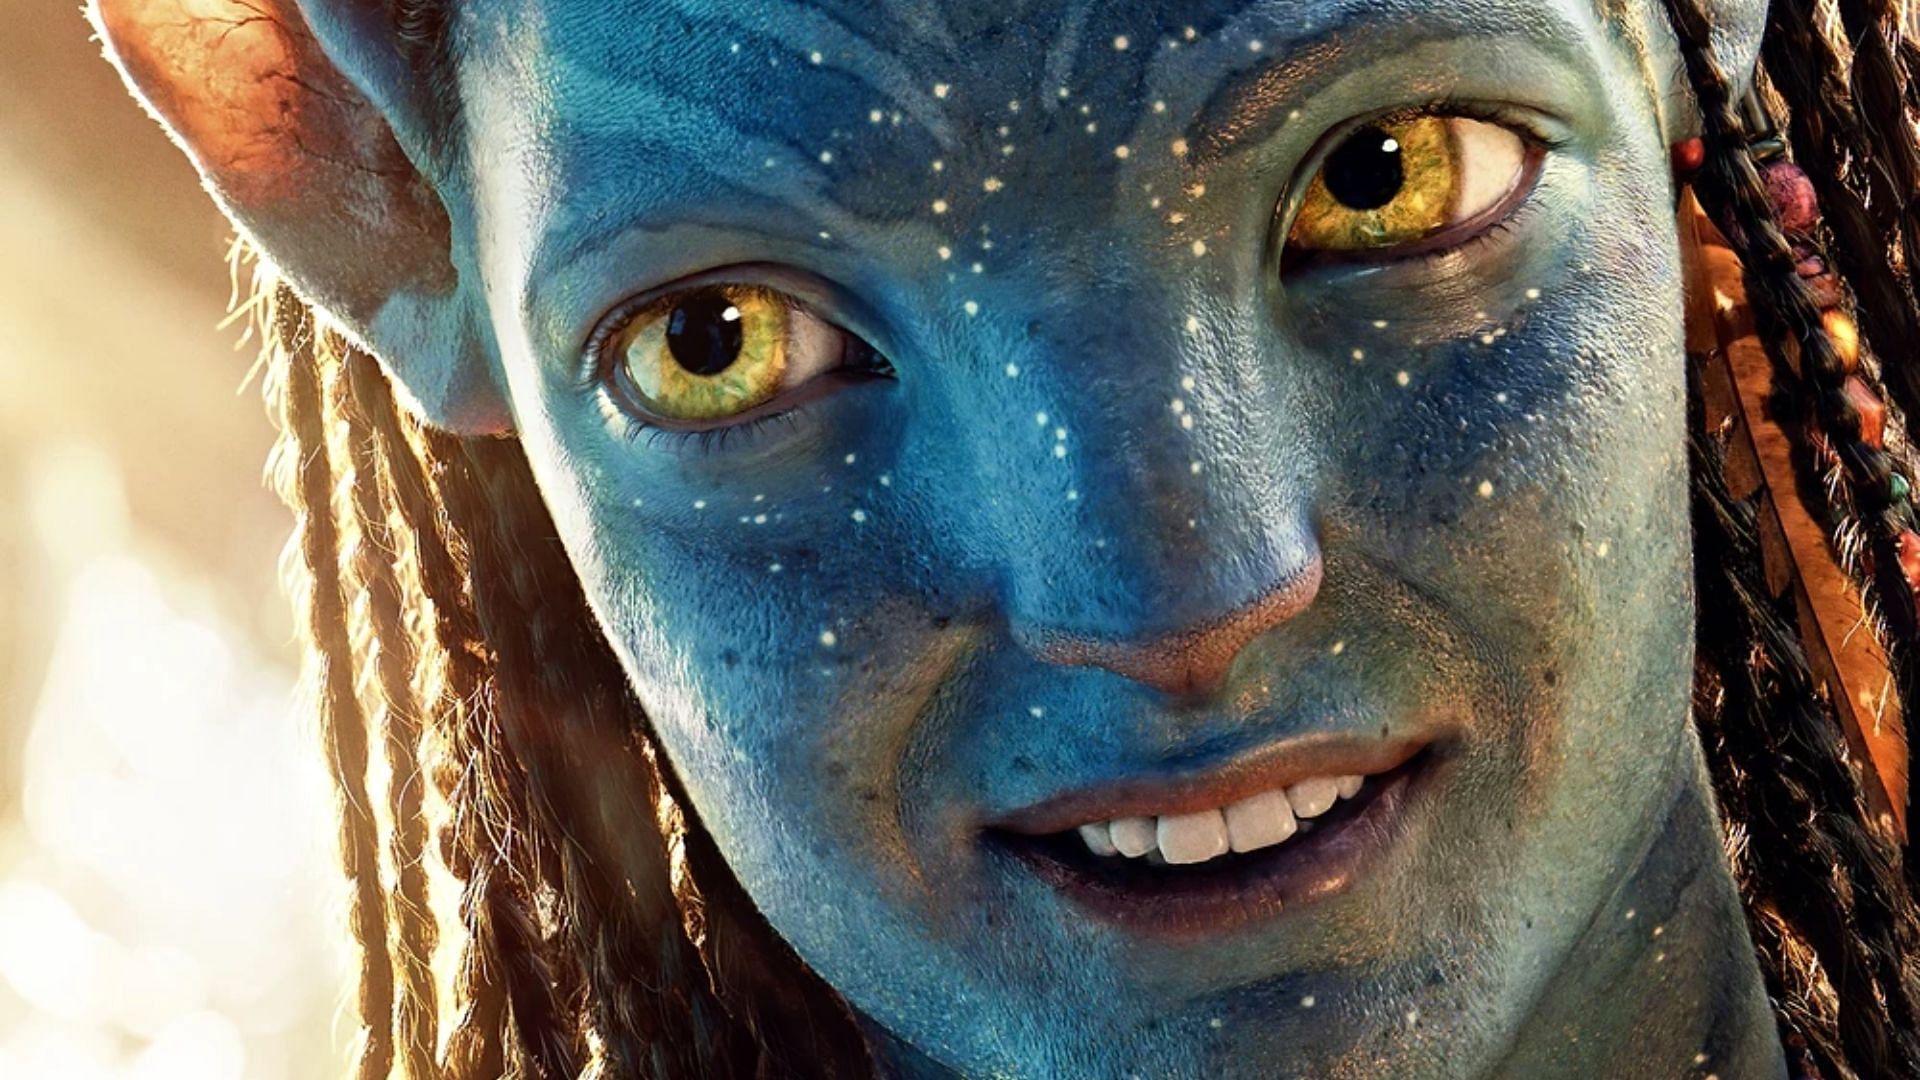 Neteyam on Avatar: The Way of Water&#039;s promotional poster (Image credits: 20th Century Fox)